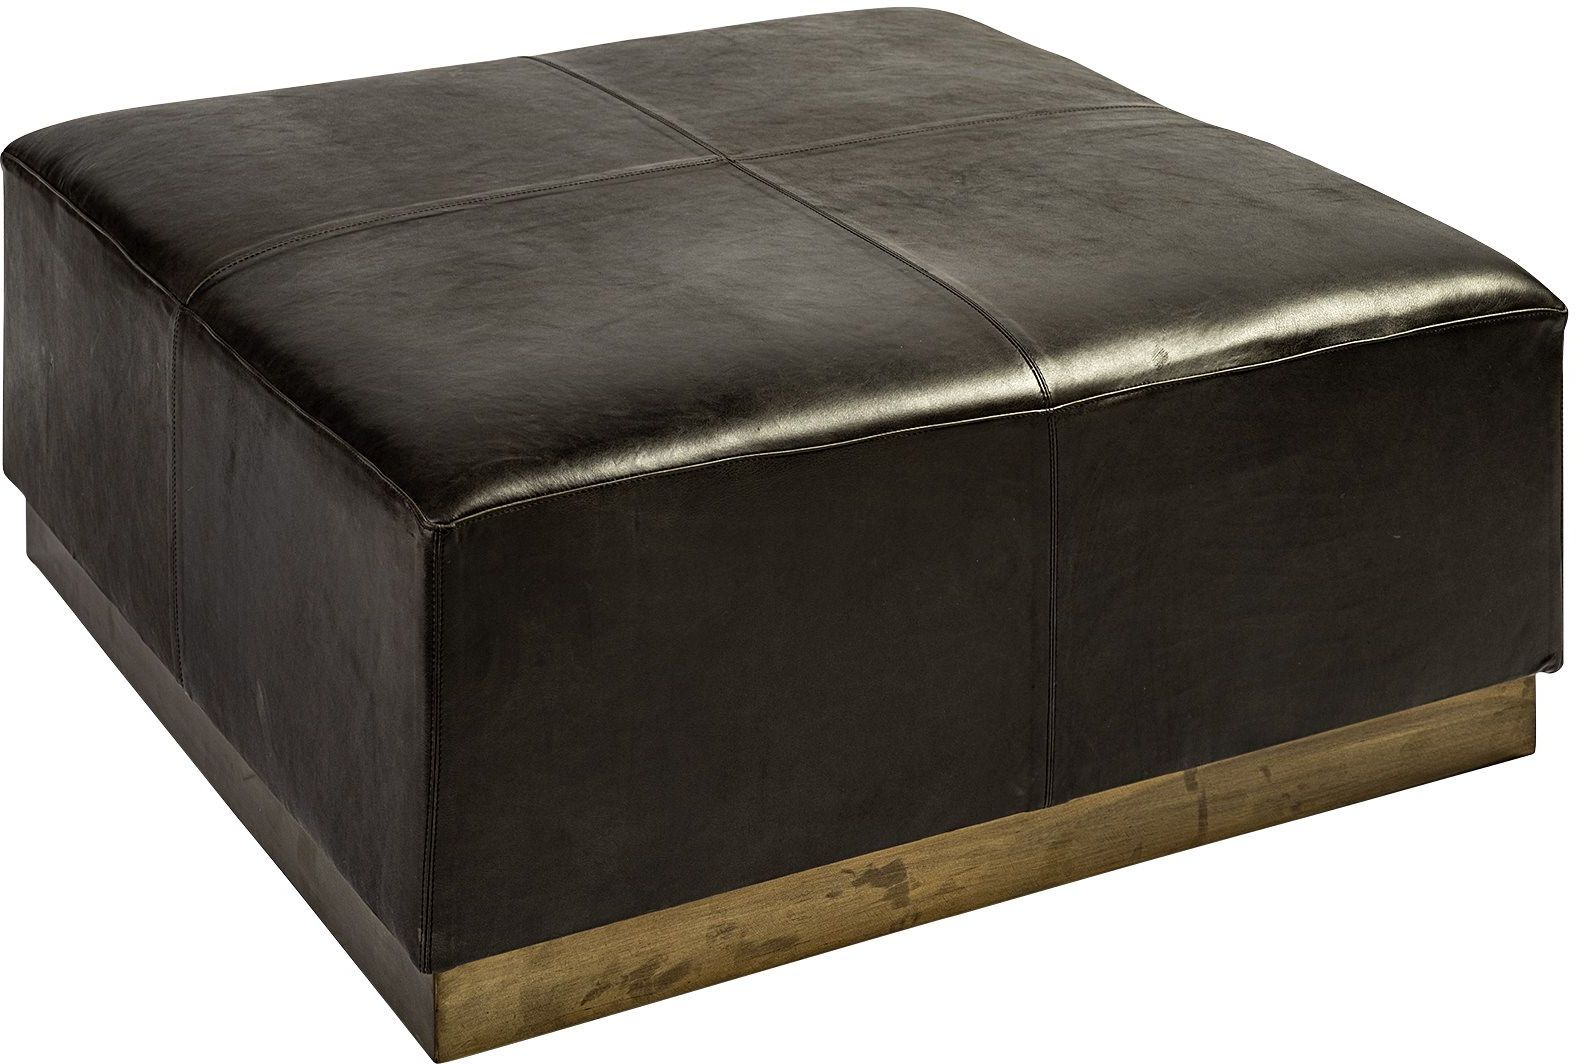 Black Leather Wrapped Ottomans With Well Known Mercana Minara Ottoman (square Black Leather Wrapped With Metal Base) –   (View 3 of 10)